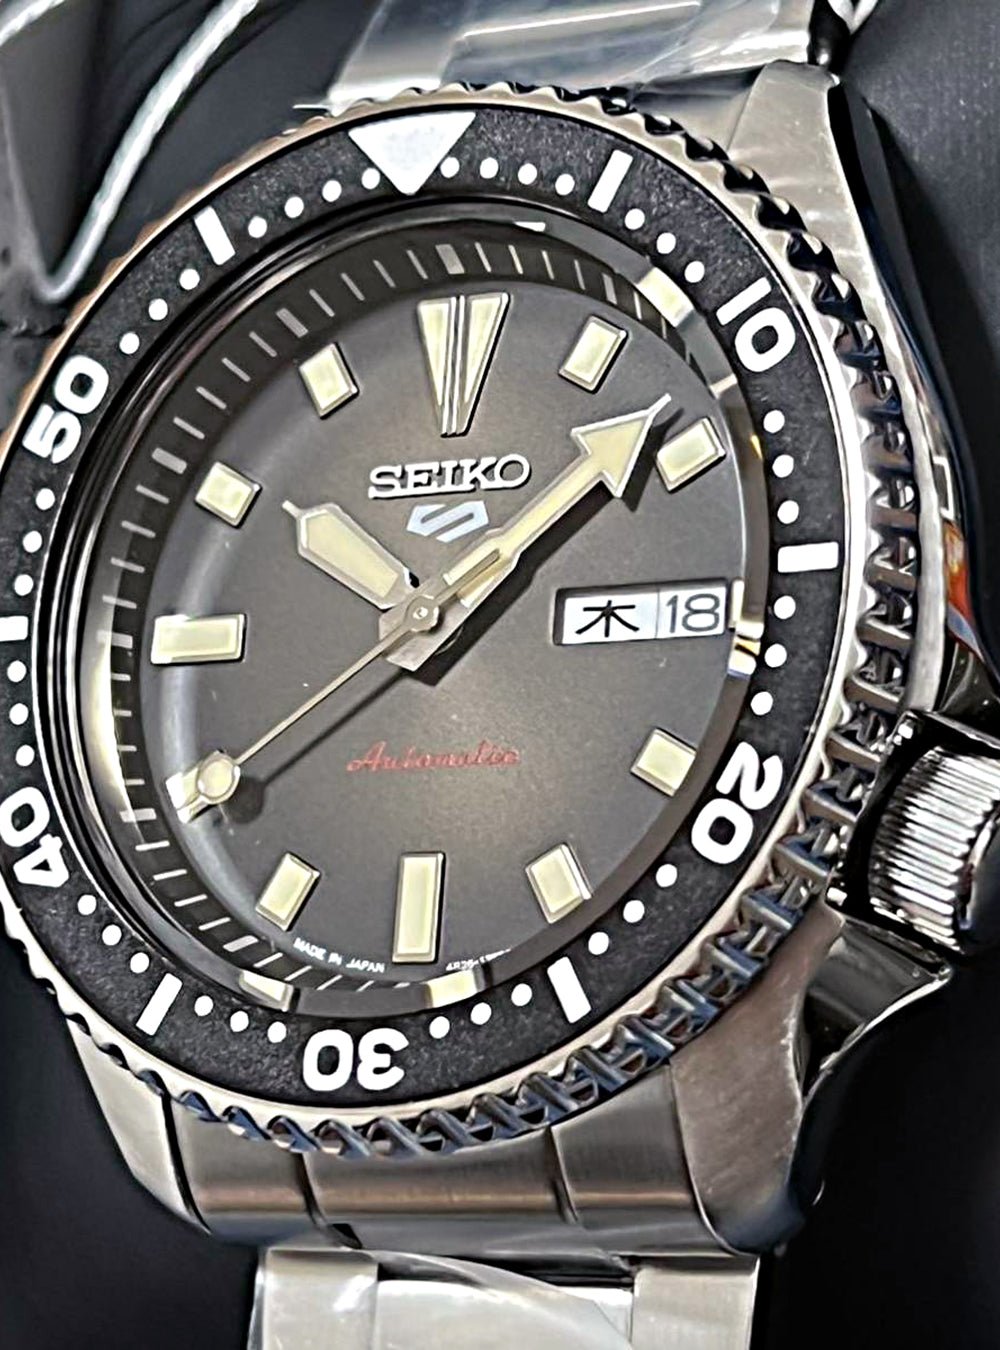 SEIKO 5 SPORTS x NANO UNIVERSE VINTAGE WATCH SBSA187 MADE IN JAPAN LIMITED EDITIONjapan-select4550320887134WRISTWATCHSEIKO